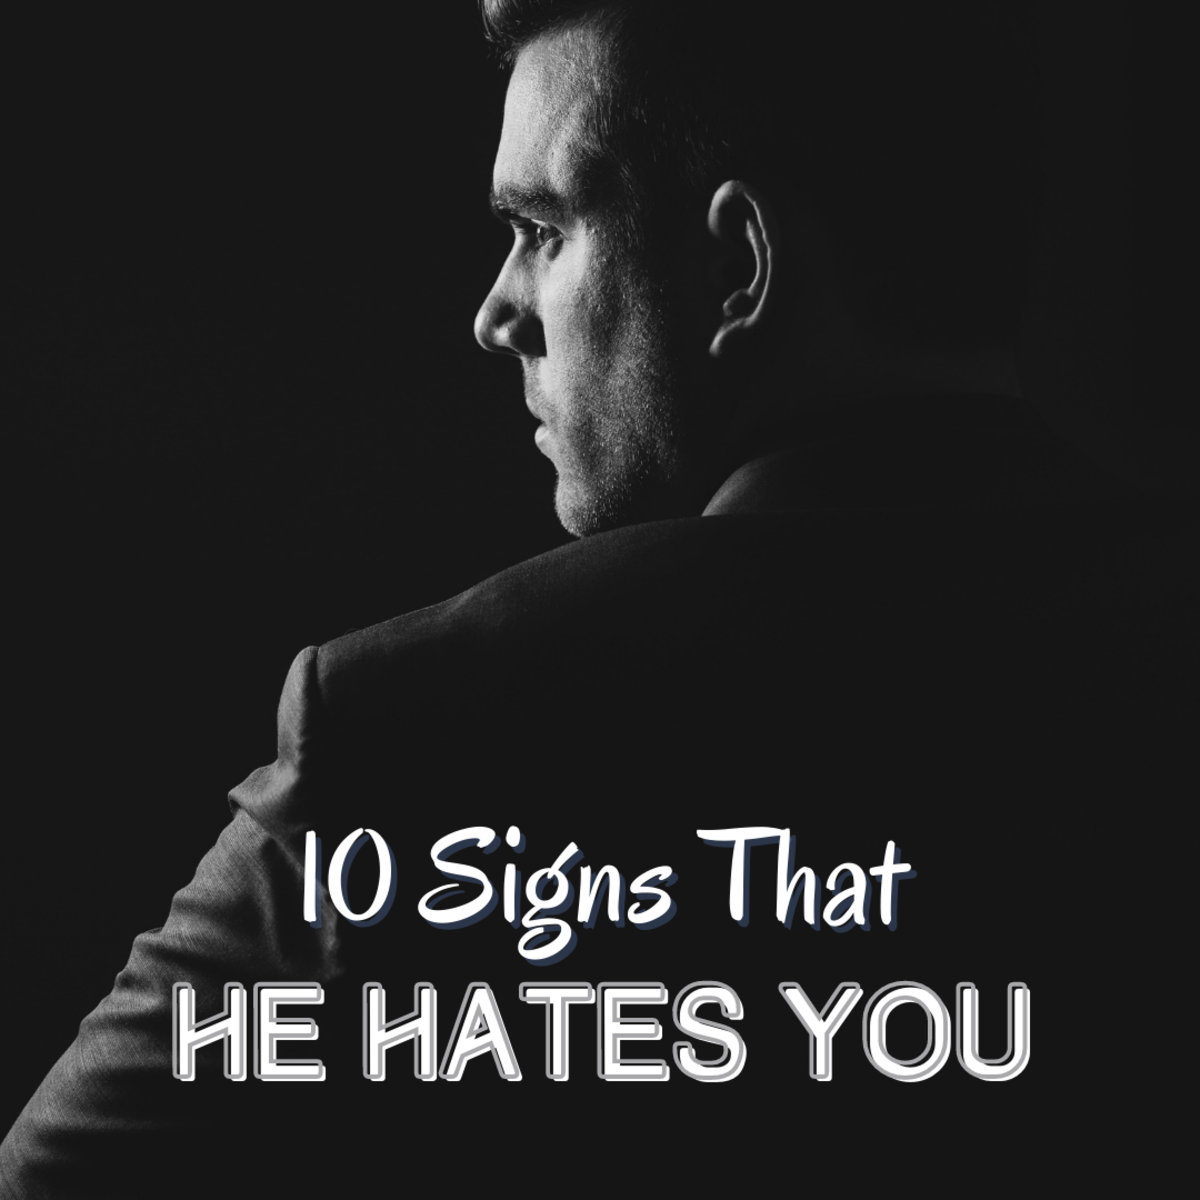 How to Tell if a Guy Hates You: 10 Signs He Thinks You're Gross